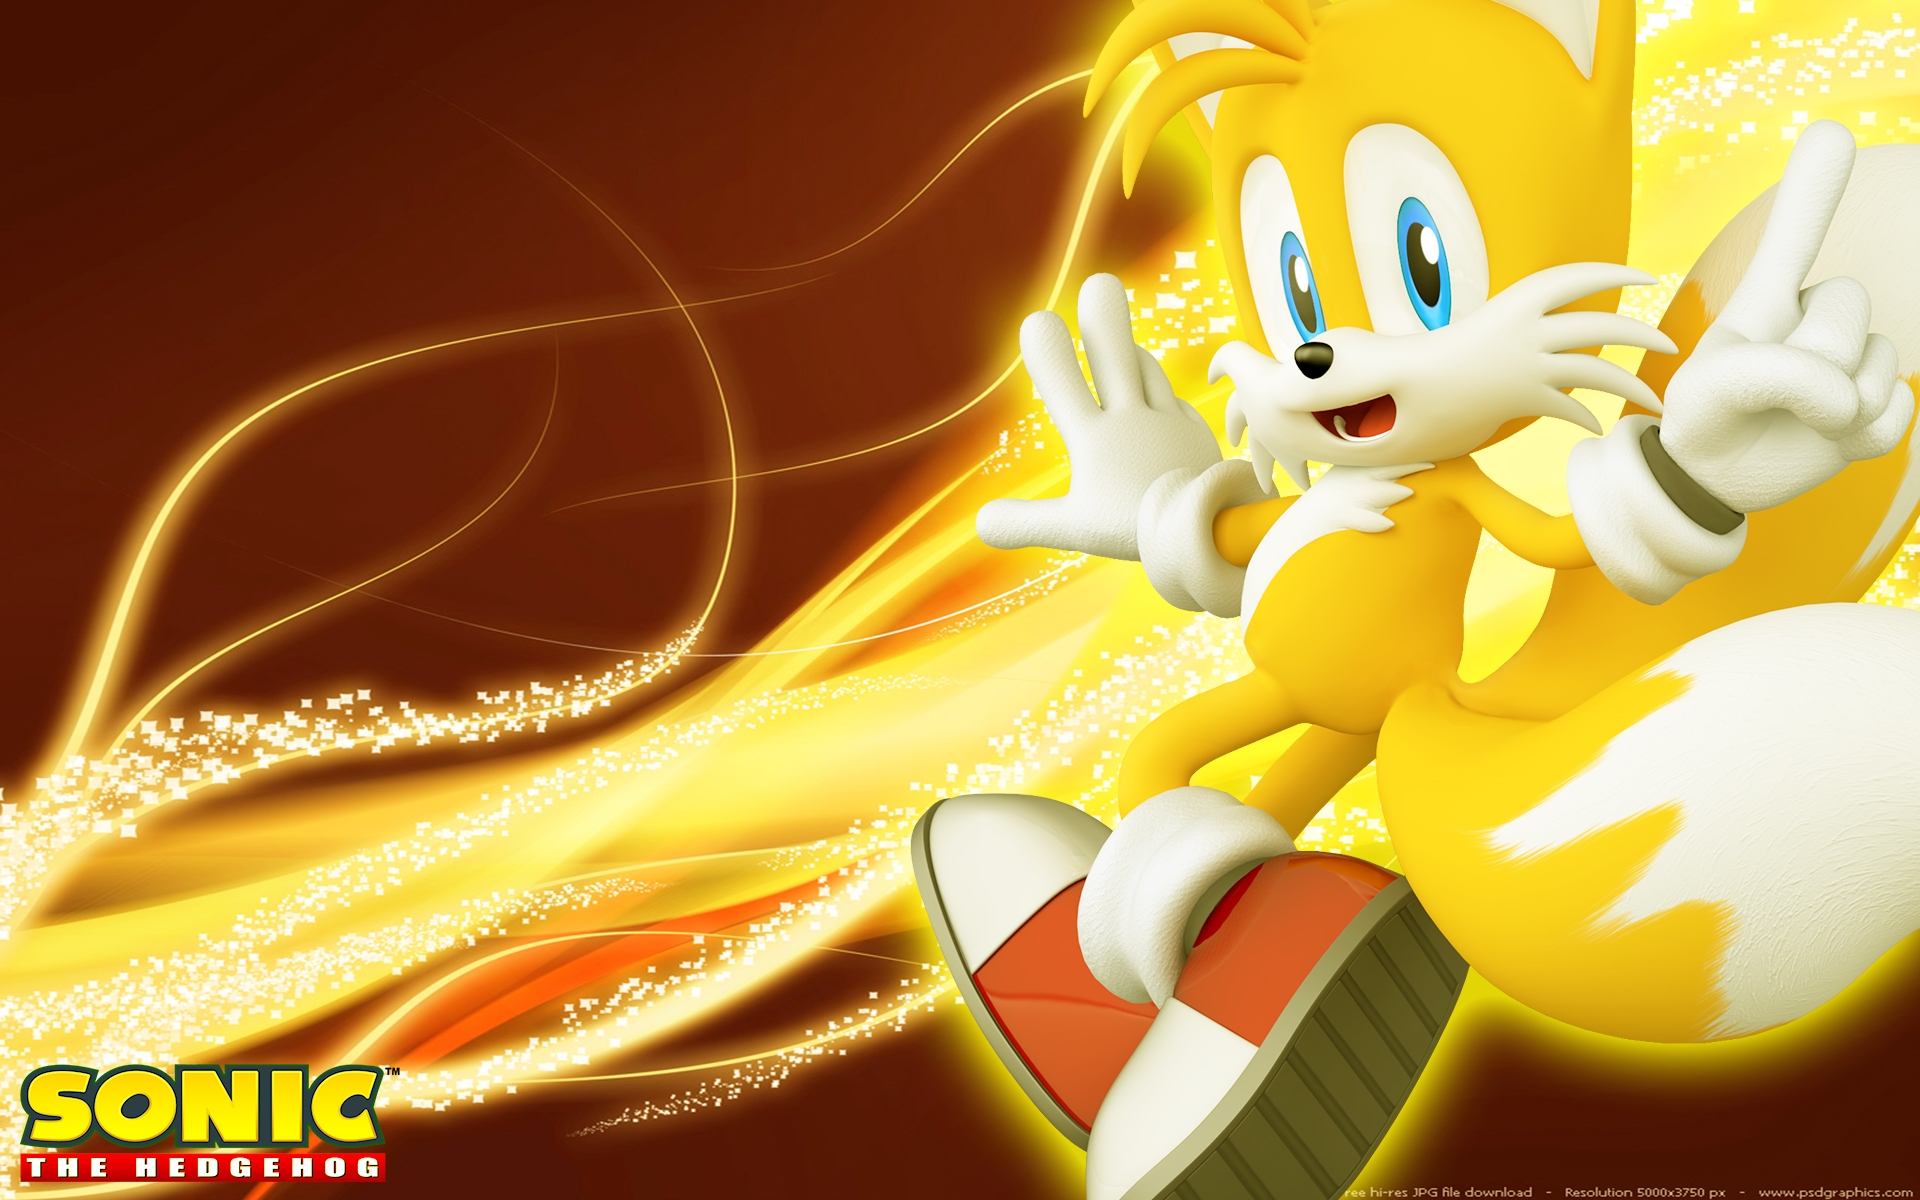 Tails Wallpaper